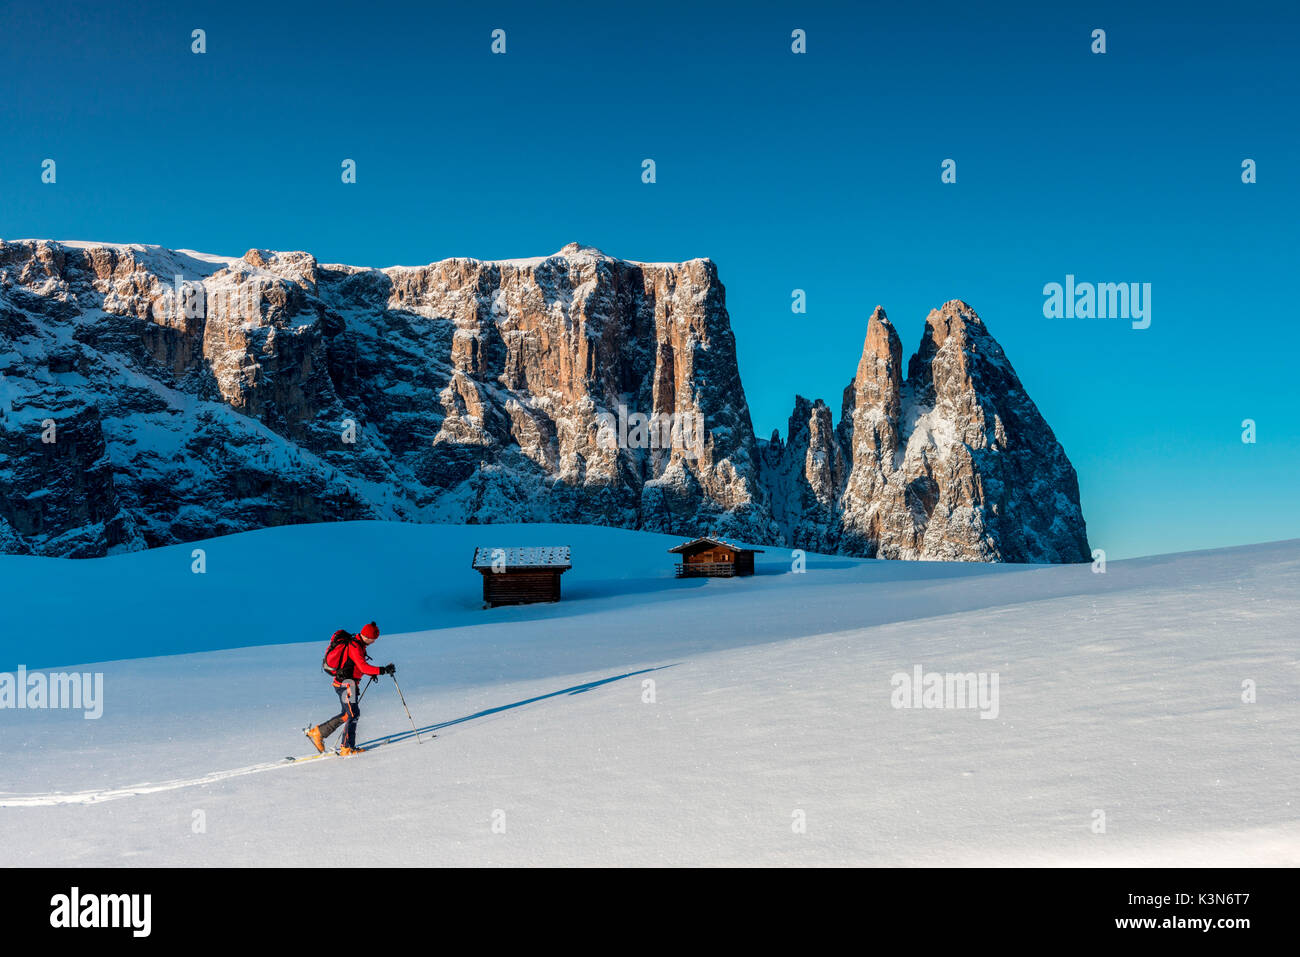 Alpe di Siusi/Seiser Alm, Dolomites, South Tyrol, Italy. Cross country skiing in the morning on the Alpe di Siusi/Seiser Alm. In the background the Schlern/Sciliar Stock Photo